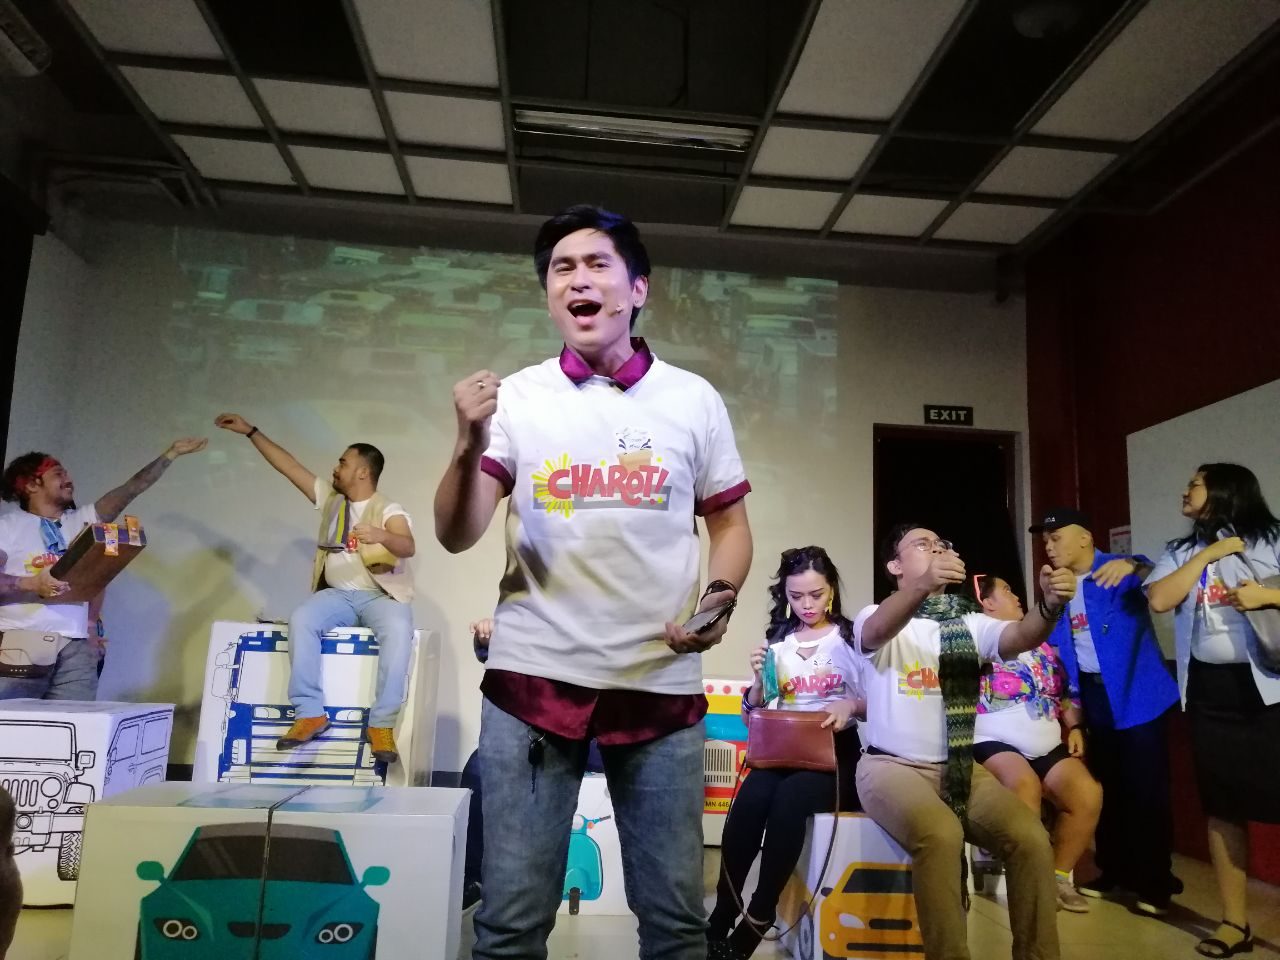 MUSICAL. 'Charot!' is a conversation on charter change set to music. Photo by Amanda Lago/Rappler 